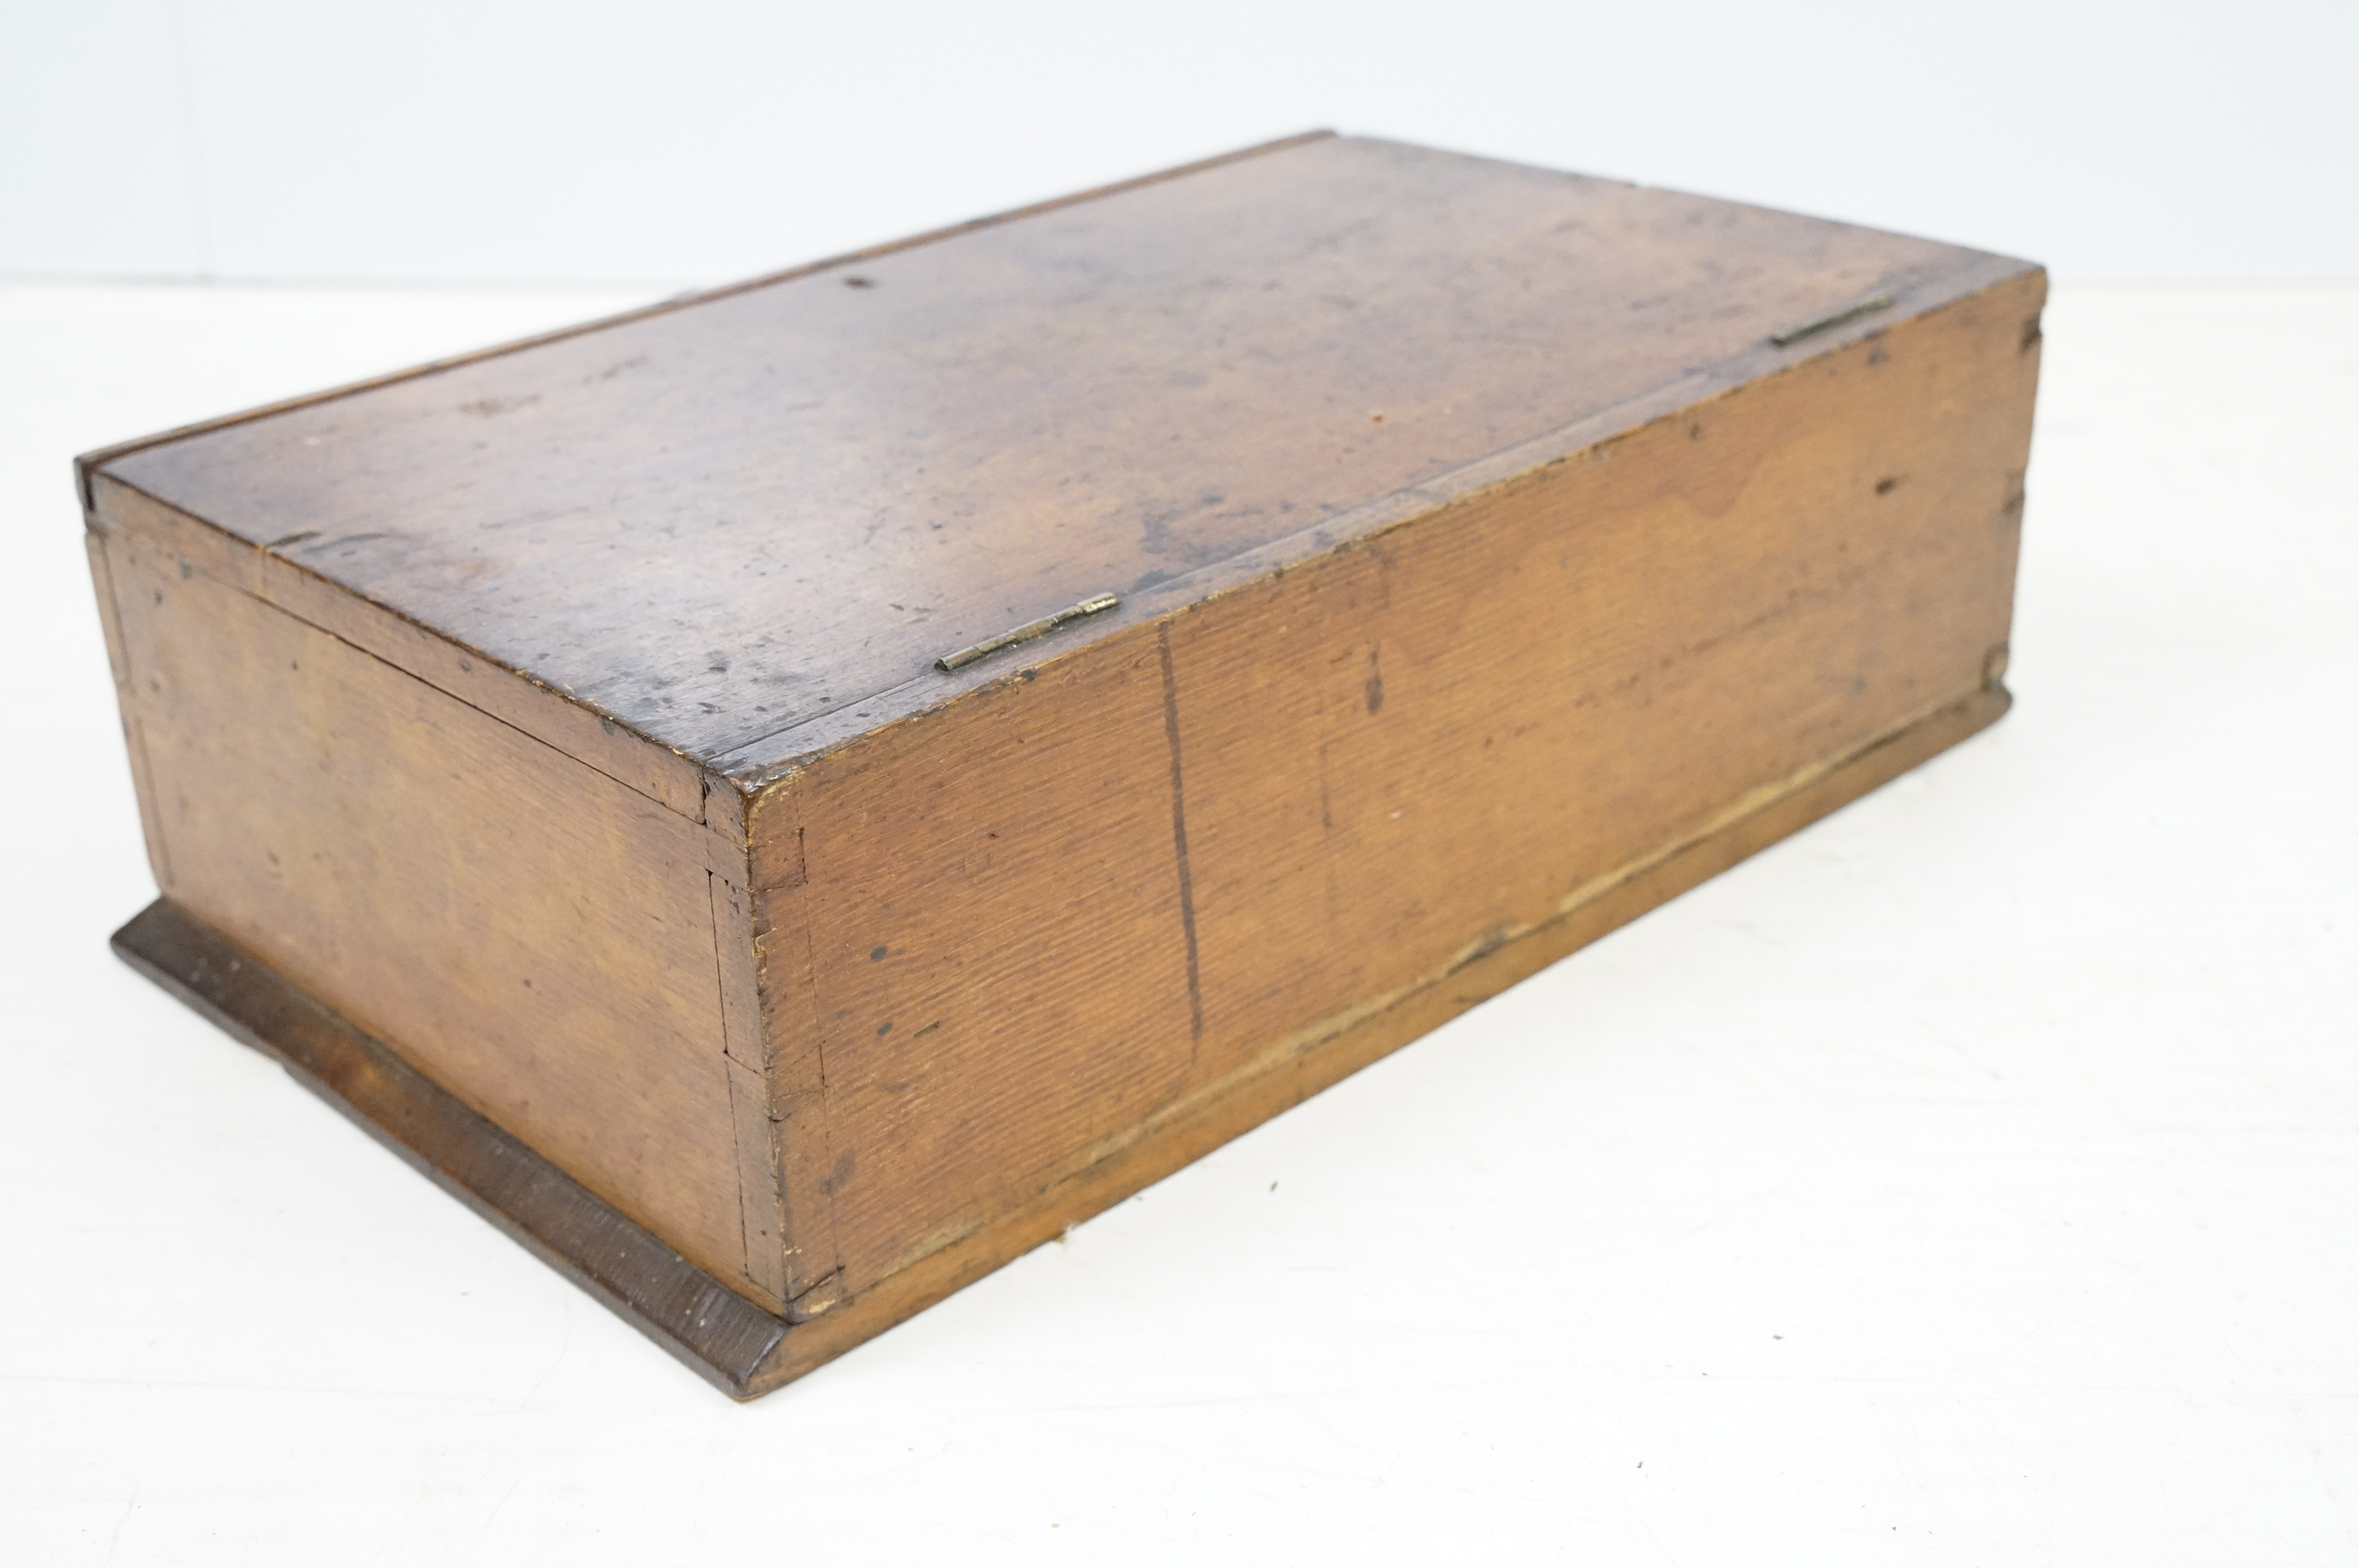 19th century Oak Bible or Documents Box with hinged lid - Image 4 of 6